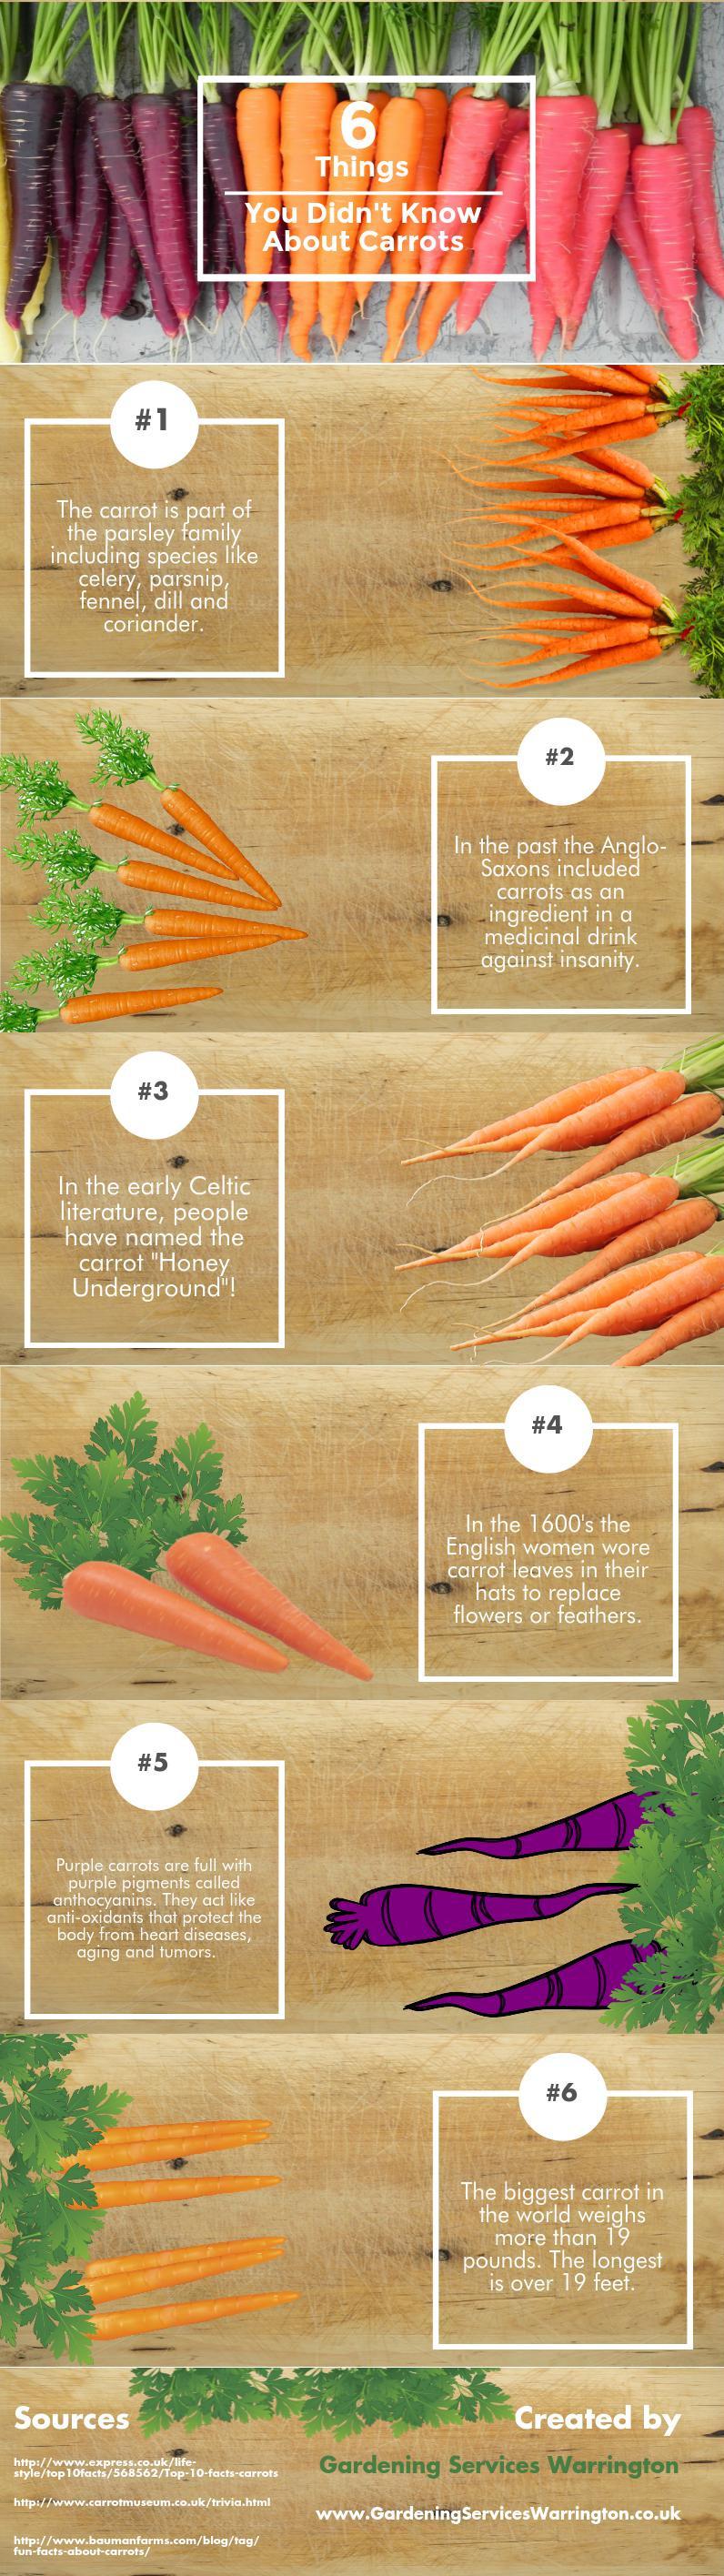  6 Things You Didn't Know About Carrots